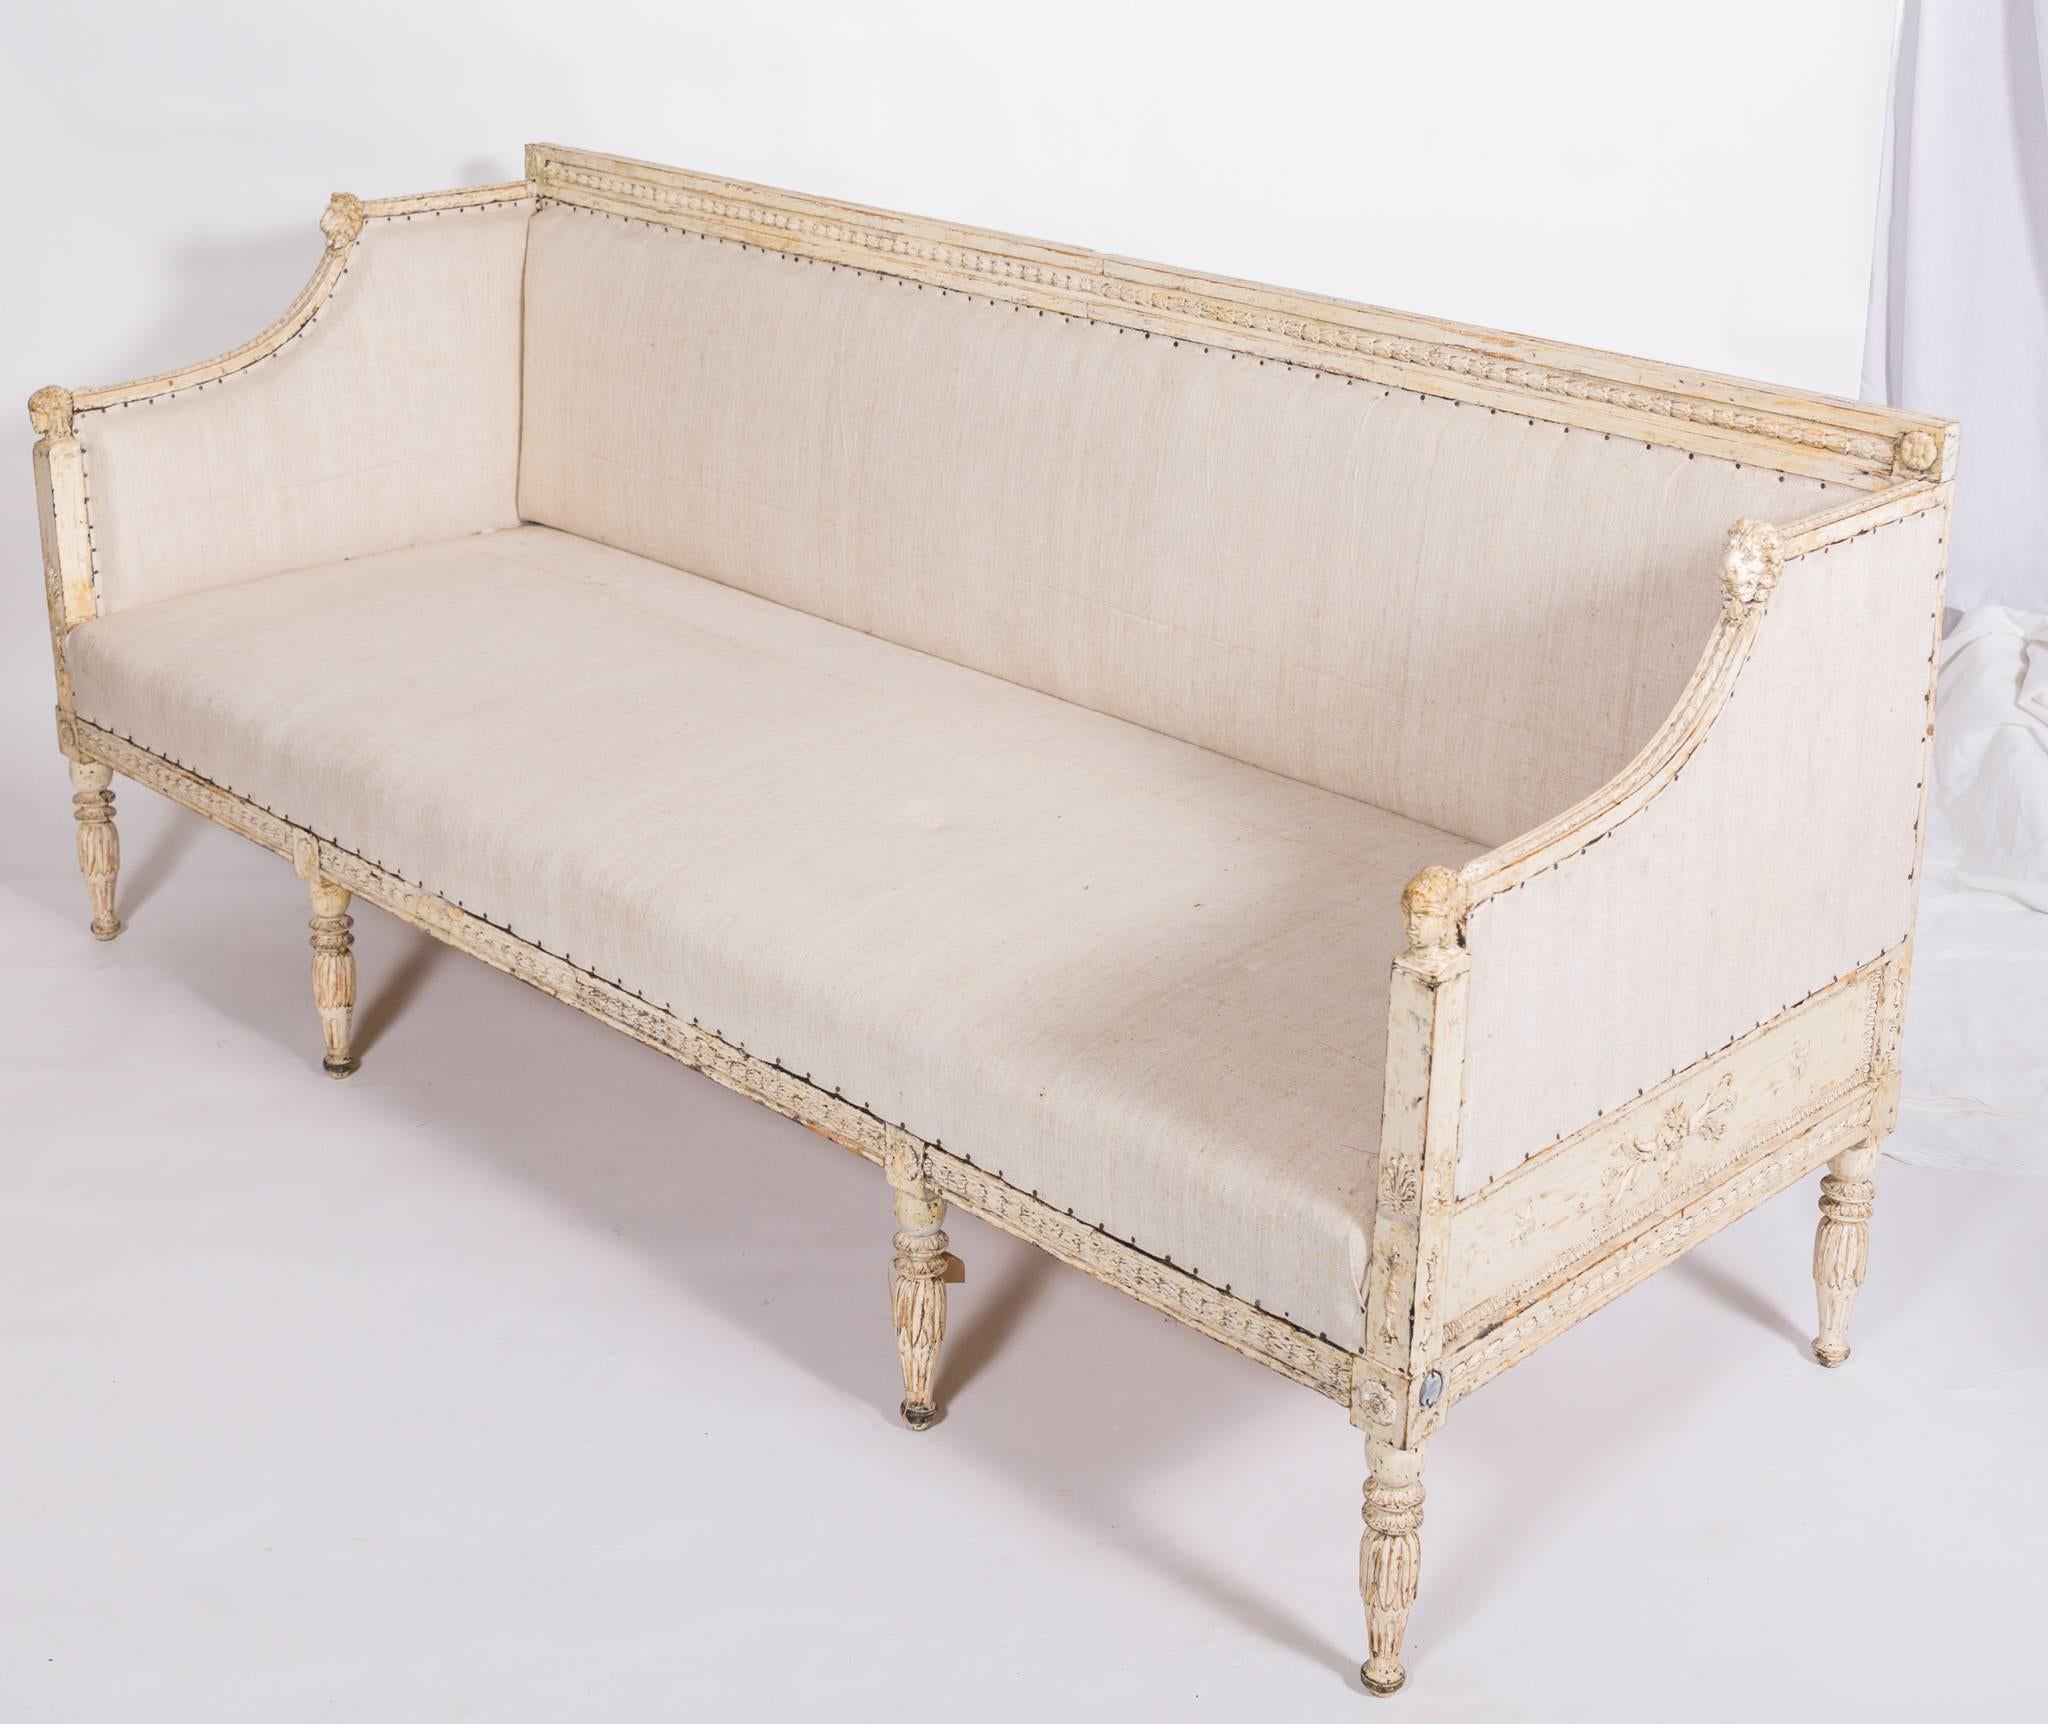 Rare Swedish sofa with detailed carvings that highlight Egyptian influence and neoclassical lion carving. The fluted legs have rosette detail. Bench is covered in a cotton and Belgian linen fabric. Bolsters are not included.